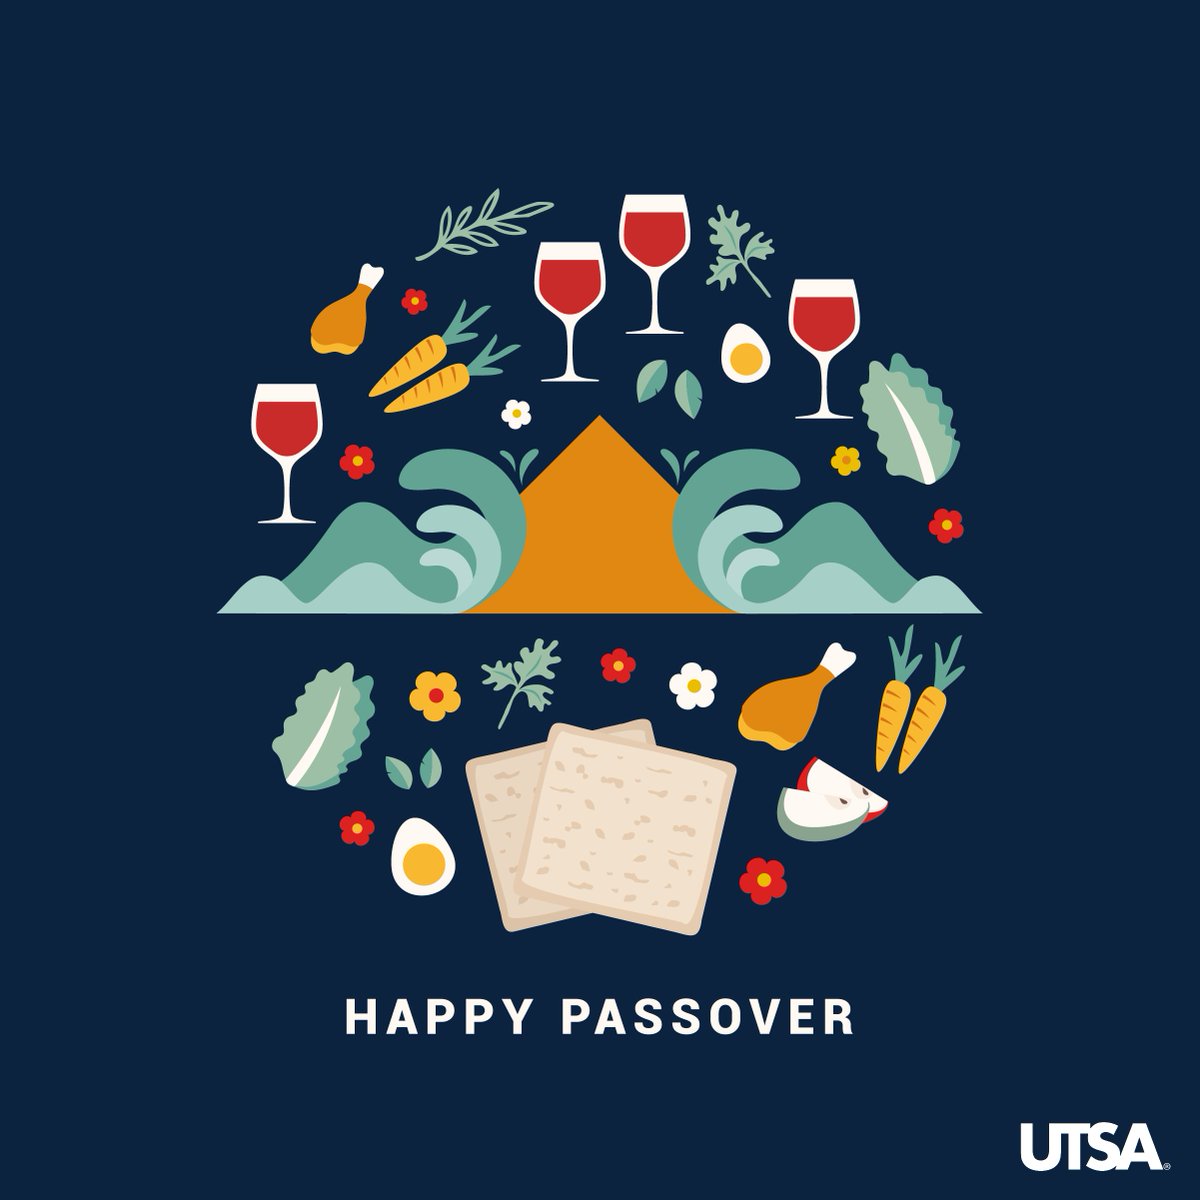 We're wishing a joyous Passover to all who are celebrating in San Antonio and around the world. Chag Pesach Sameach! #UTSA #Pesach #Passover